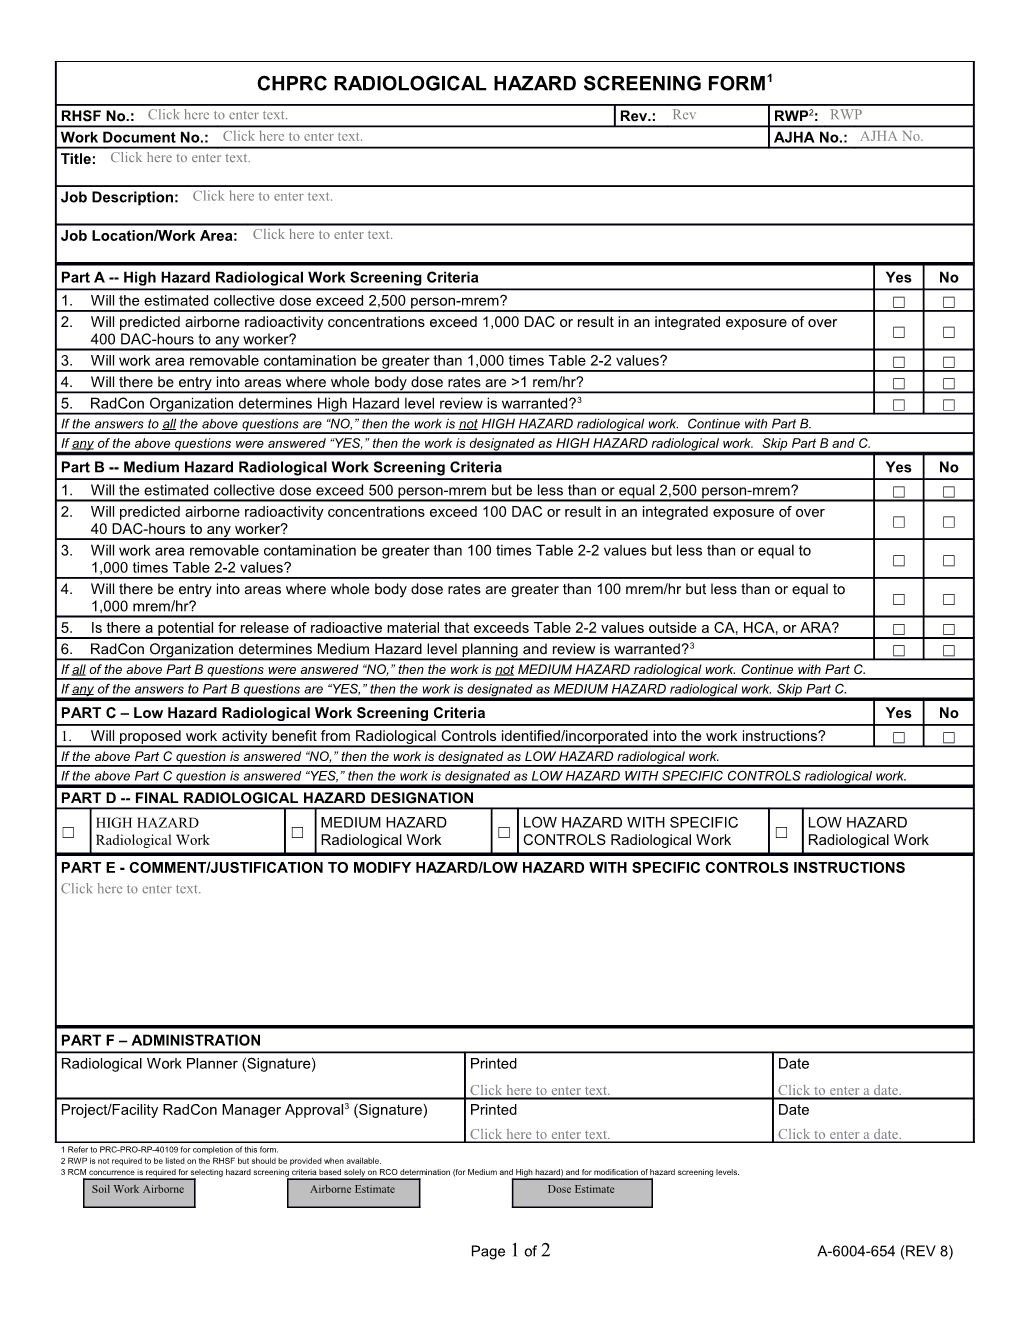 1 Refer to PRC-PRO-RP-40109 for Completion of This Form